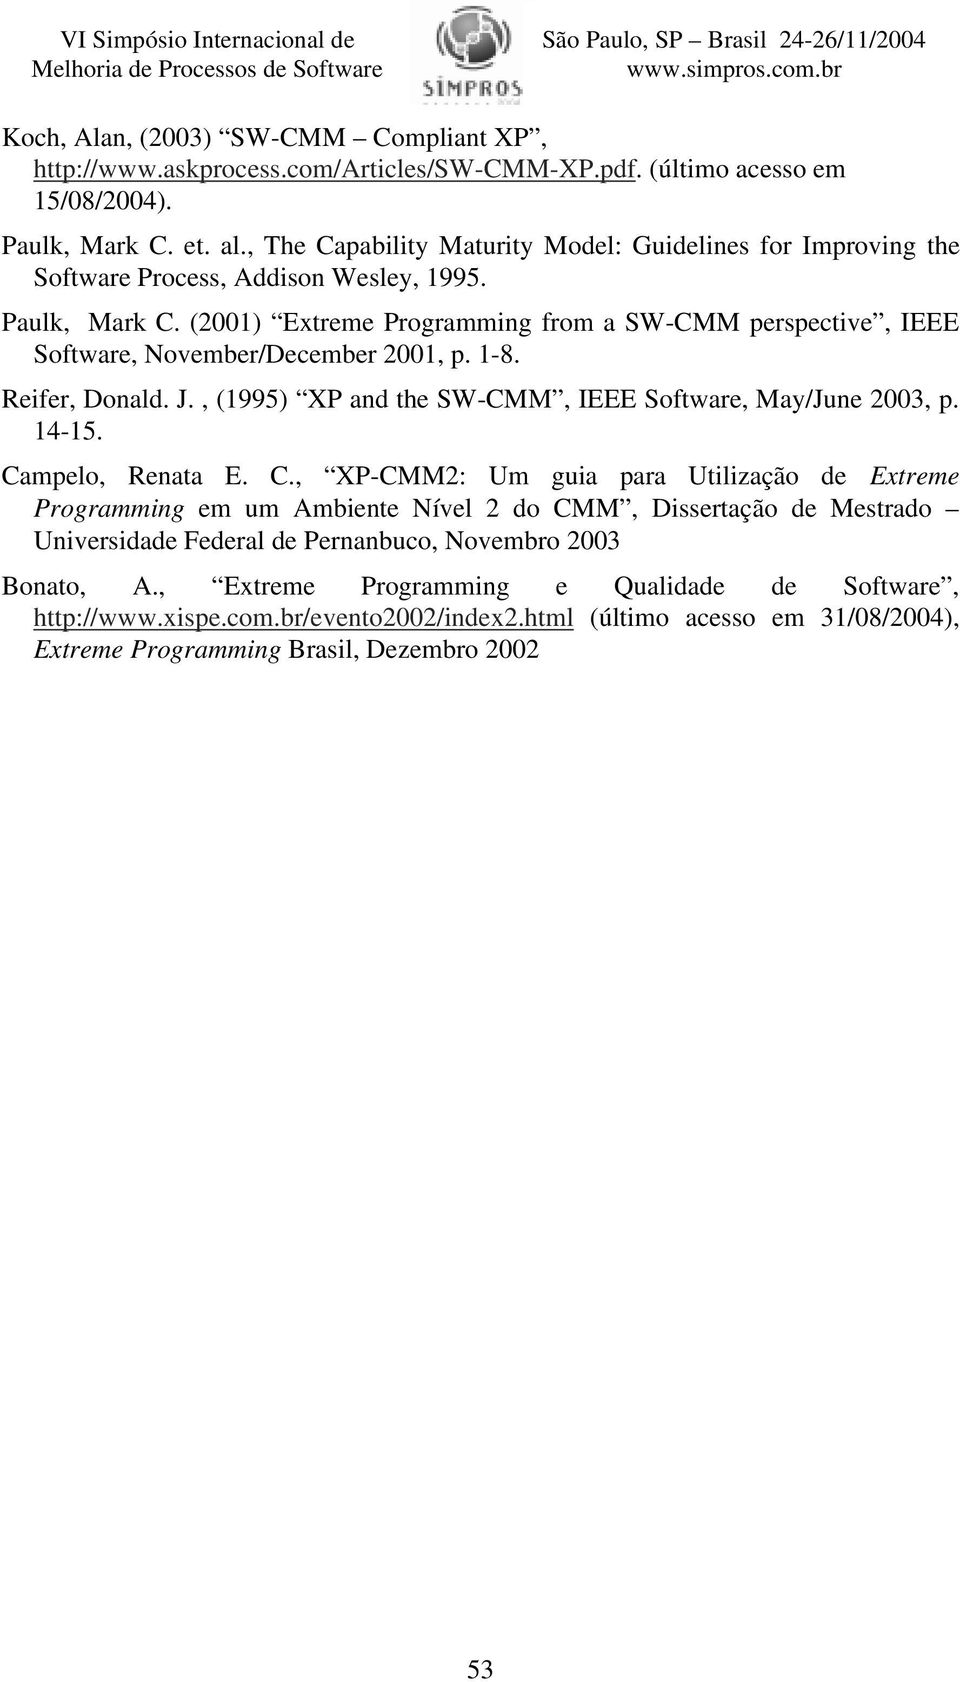 (2001) Extreme Programming from a SW-CMM perspective, IEEE Software, November/December 2001, p. 1-8. Reifer, Donald. J., (1995) XP and the SW-CMM, IEEE Software, May/June 2003, p. 14-15.